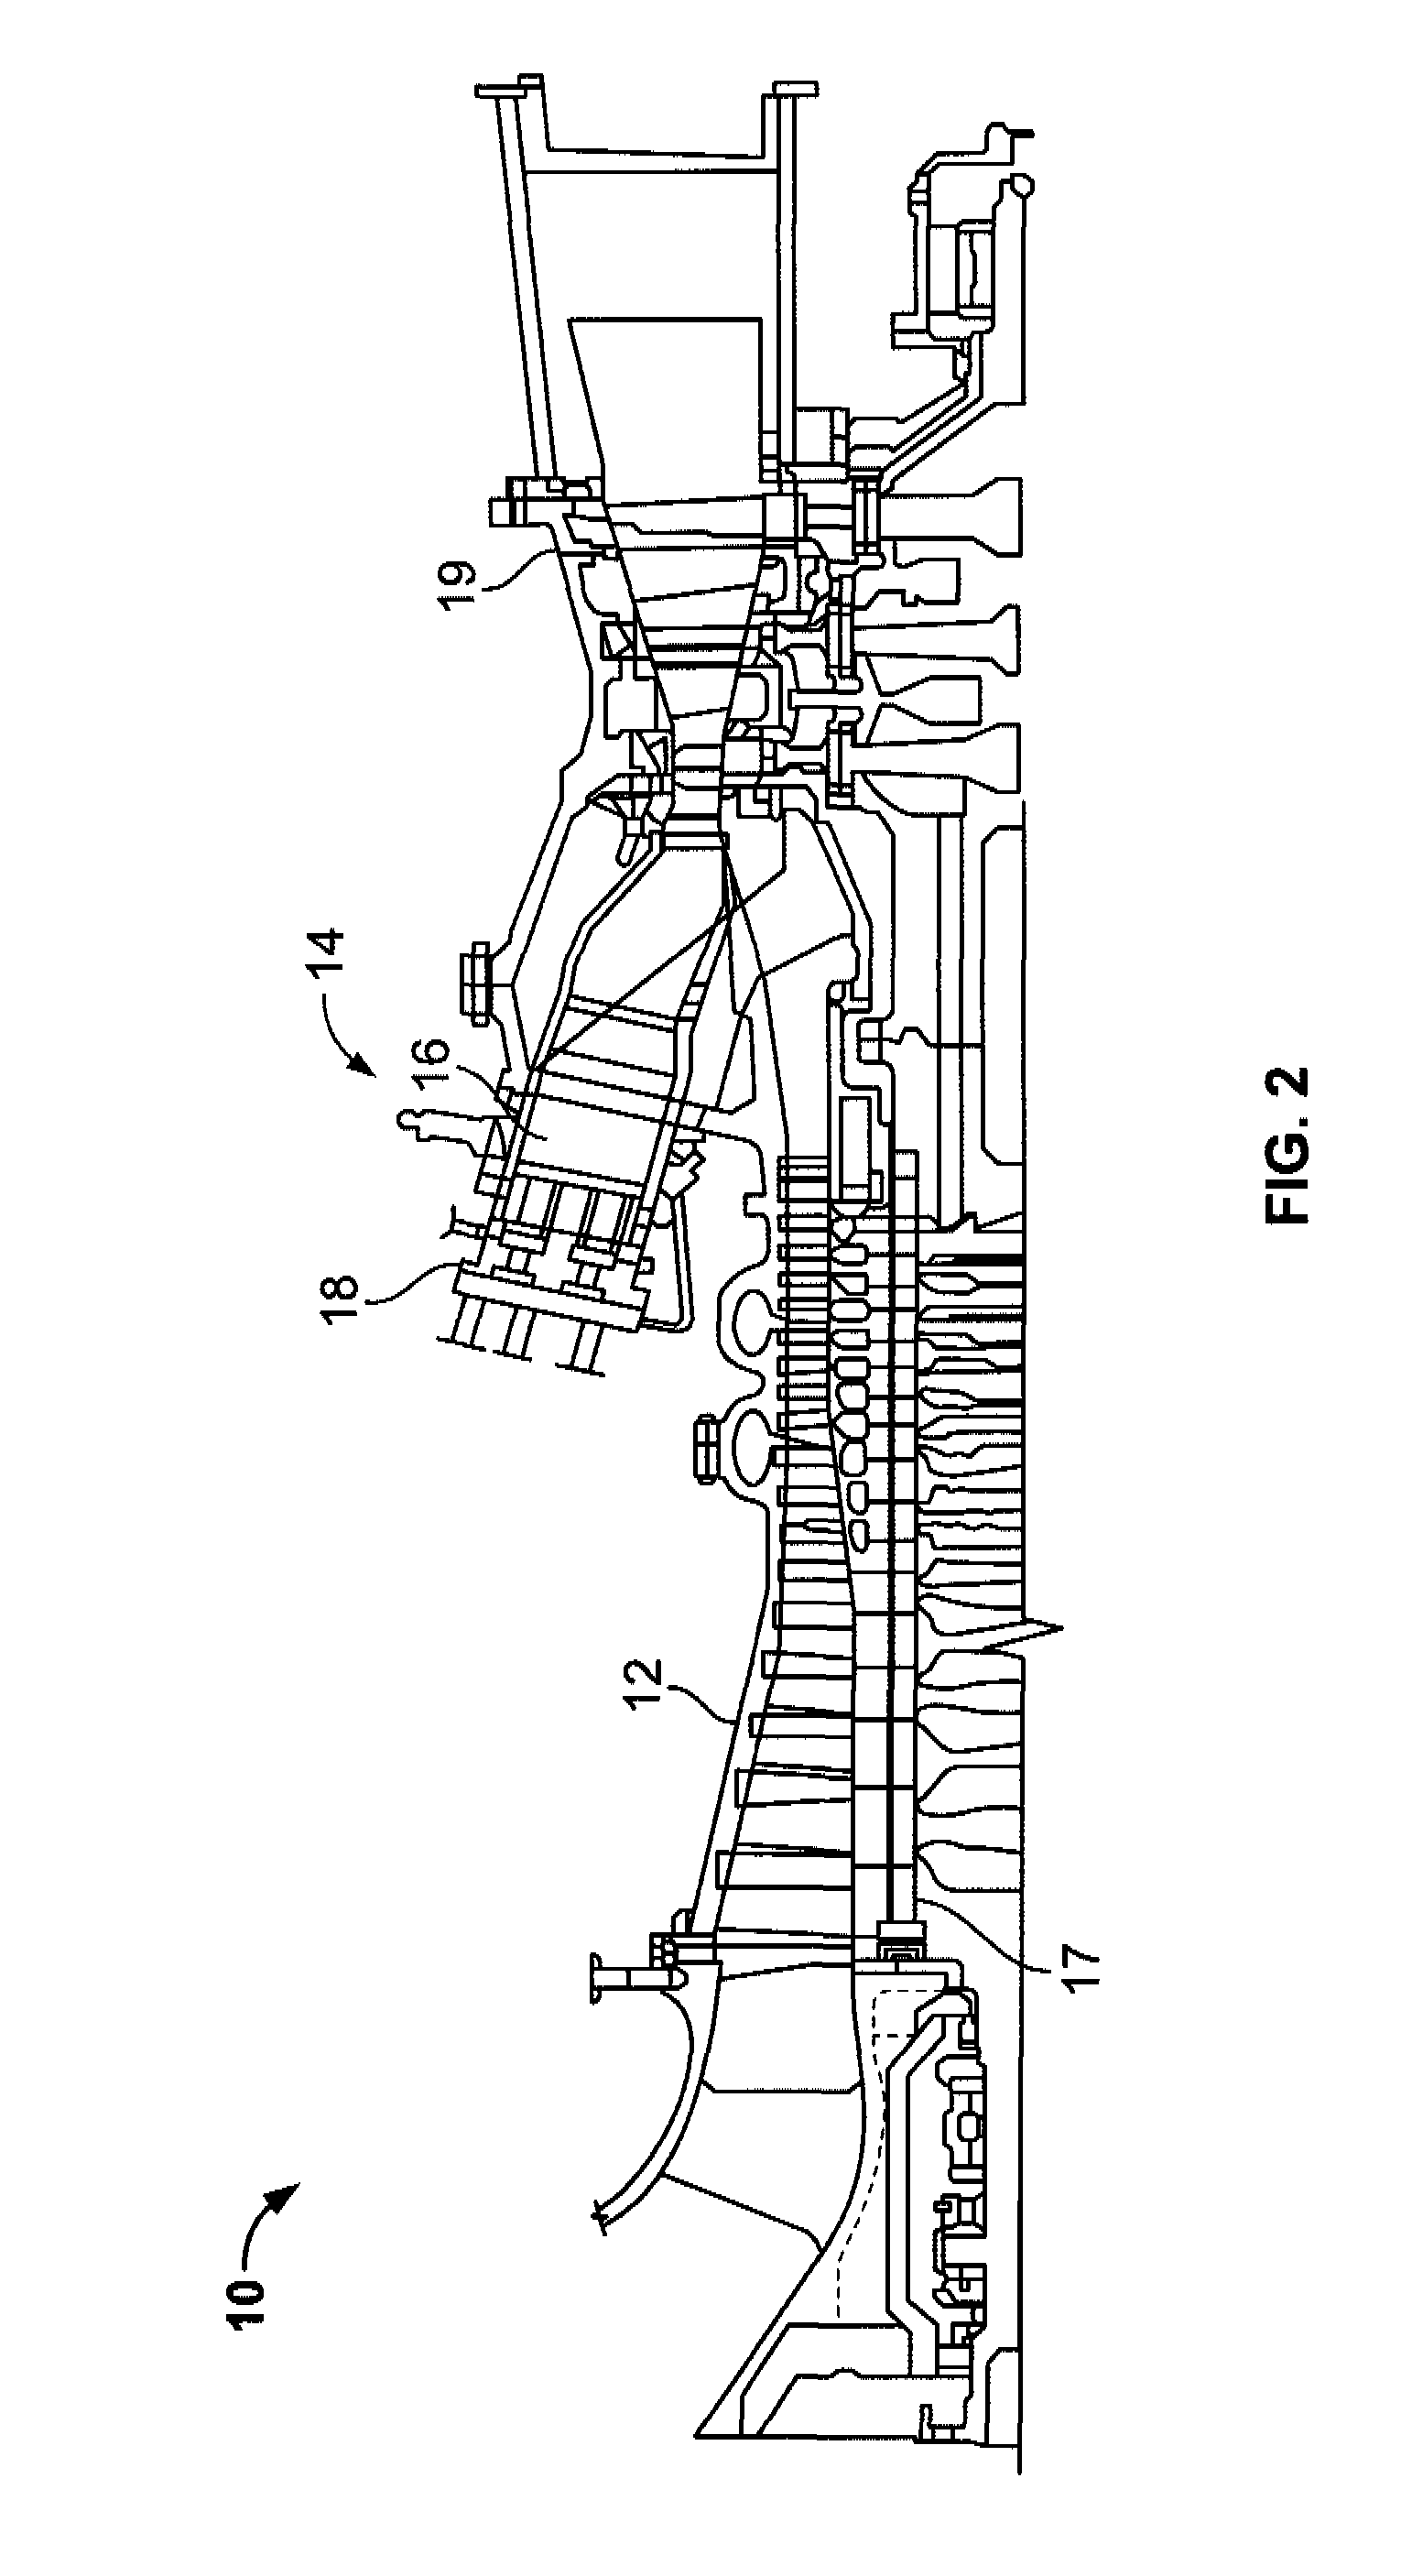 Injection assembly for a combustor